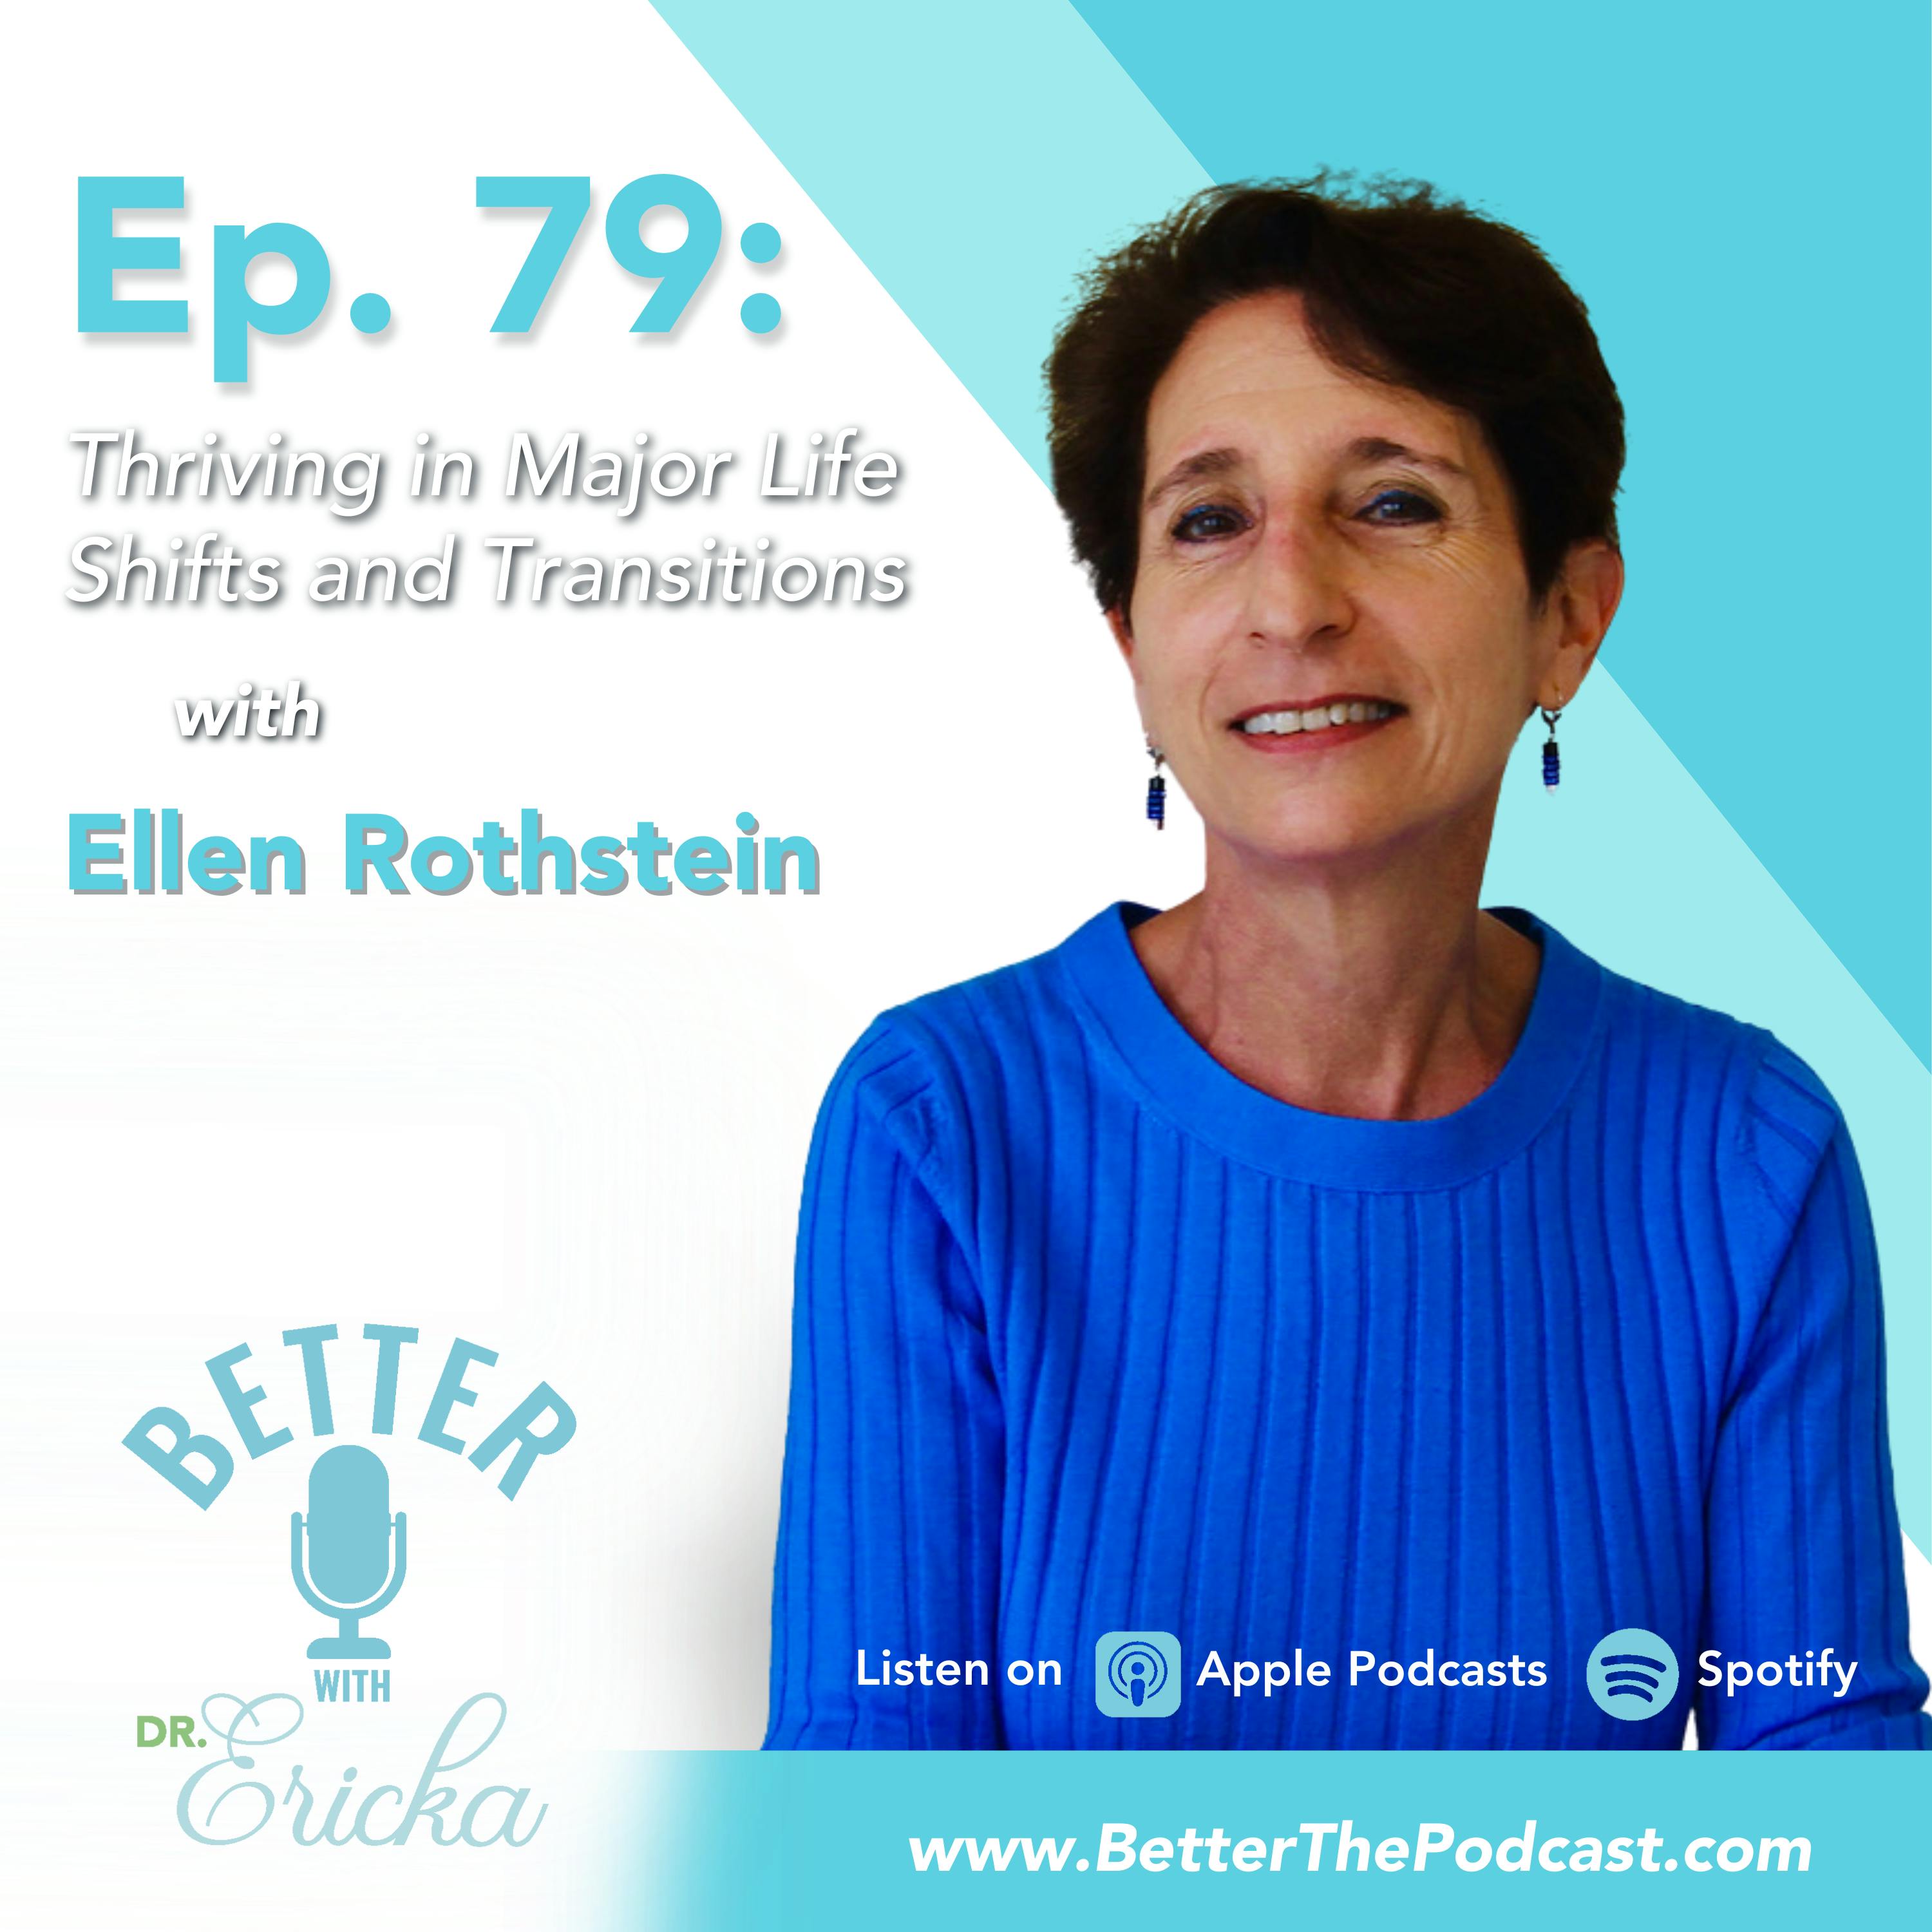 Thriving in Major Life Shifts and Transitions with Ellen Rothstein